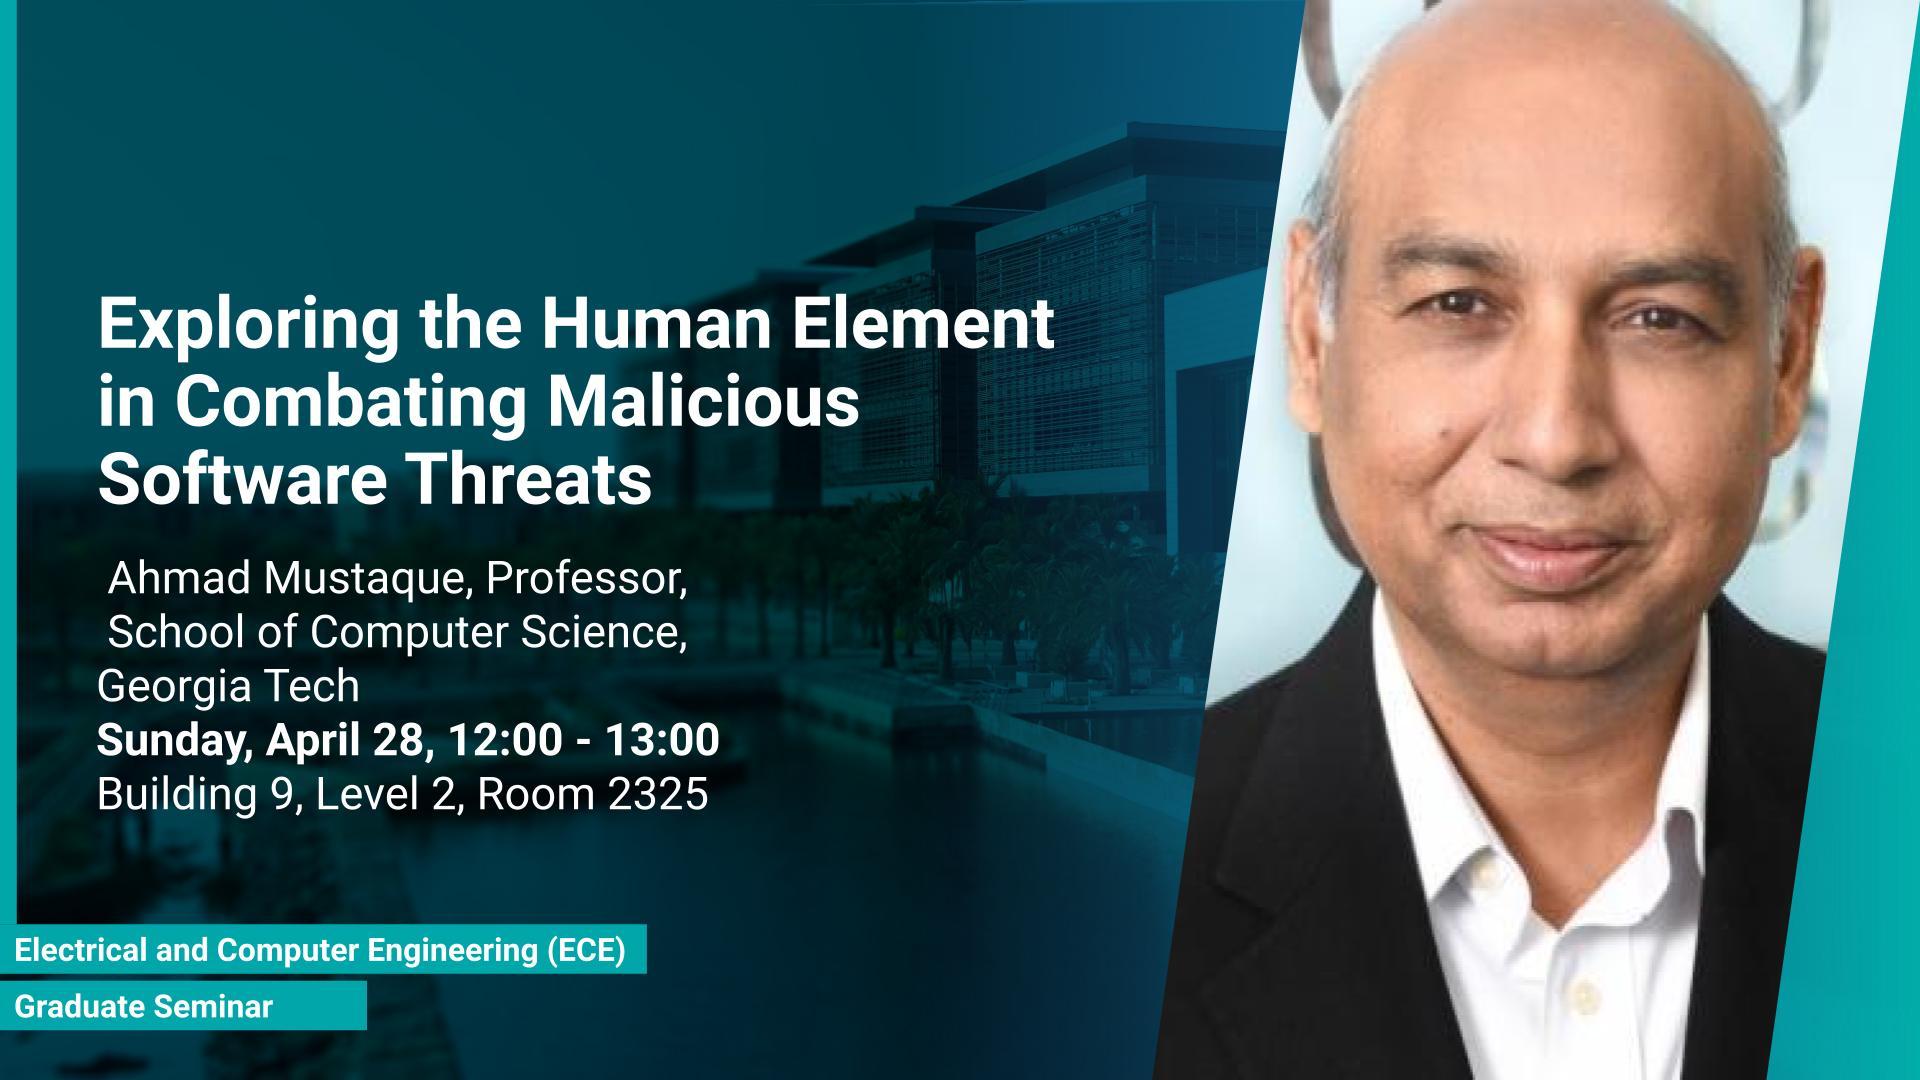 KAUST-CEMSE-ECE-Ahmed-Mustaque-Virtual-Exploring-the-Human-Element-in-Combating-Malicious-Software-Threats.jpg